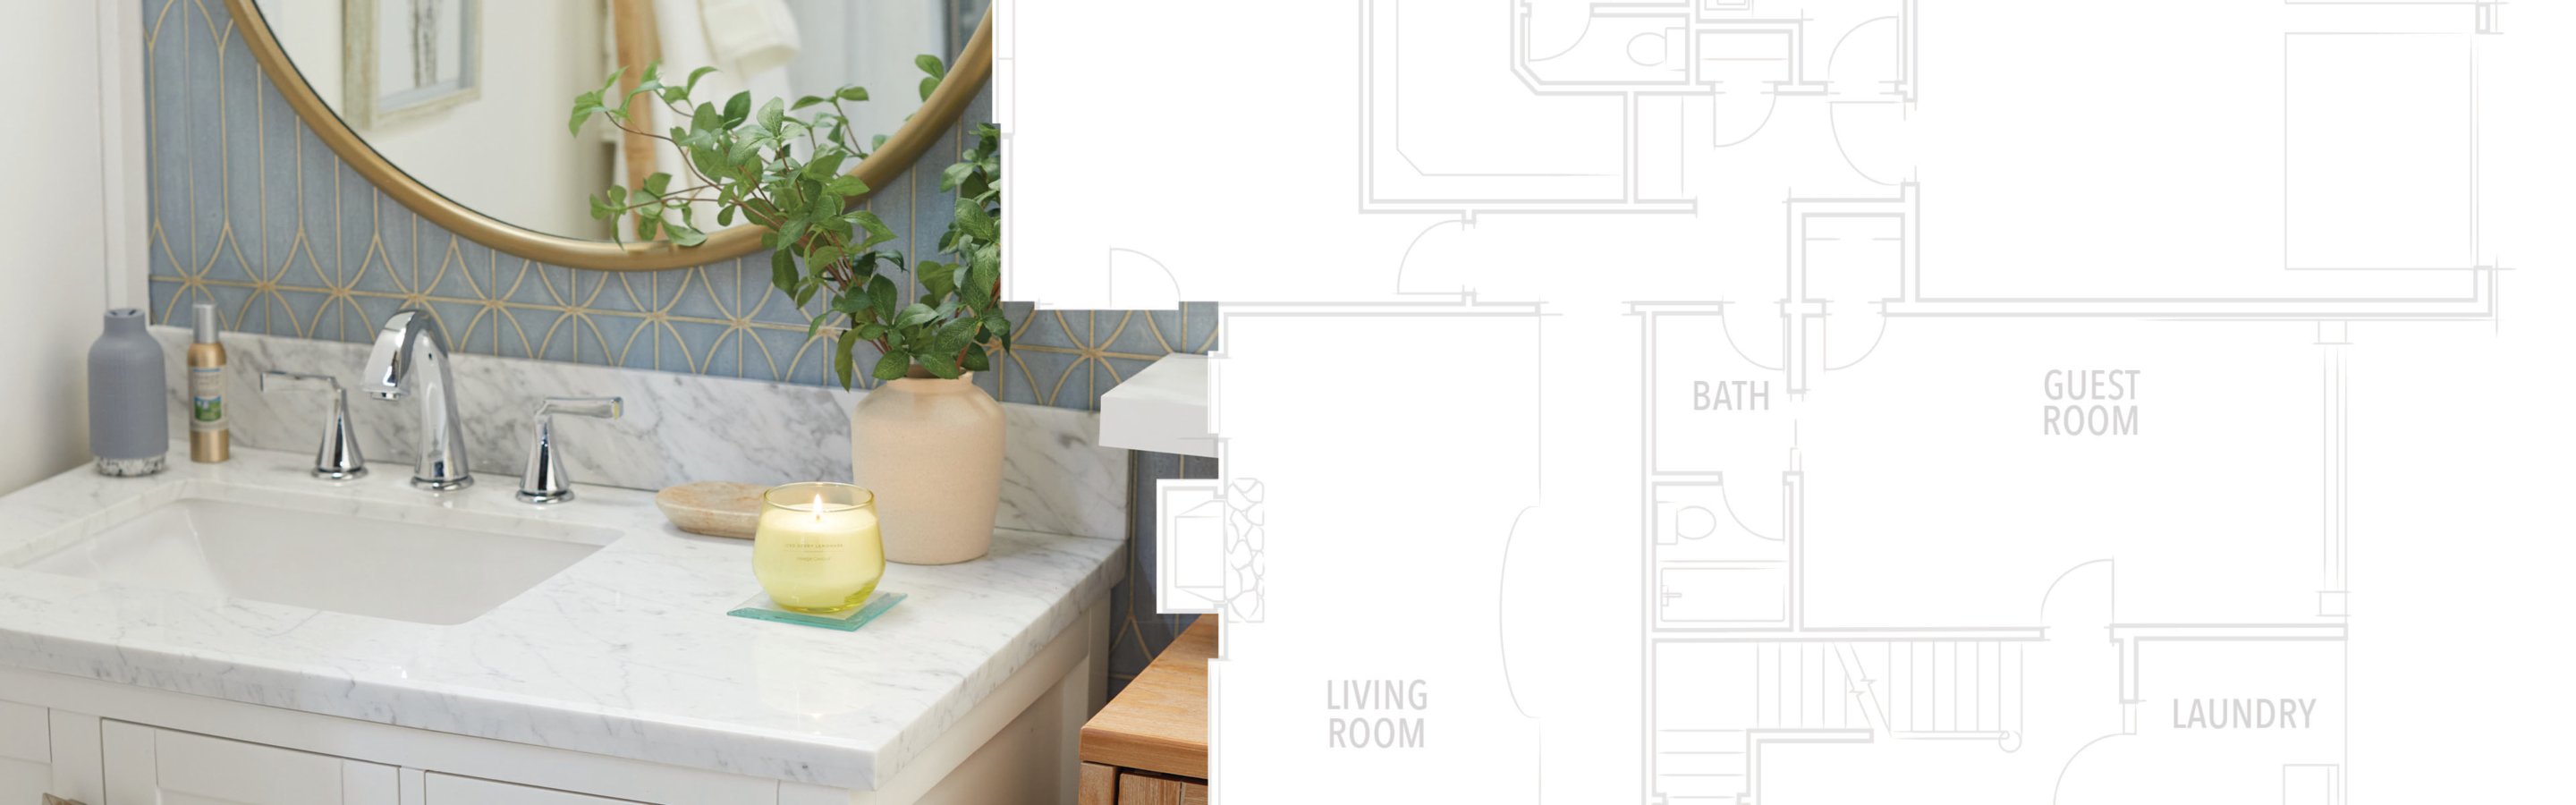 studio candle and vase with leaves on a bathroom sink counter with house blueprint